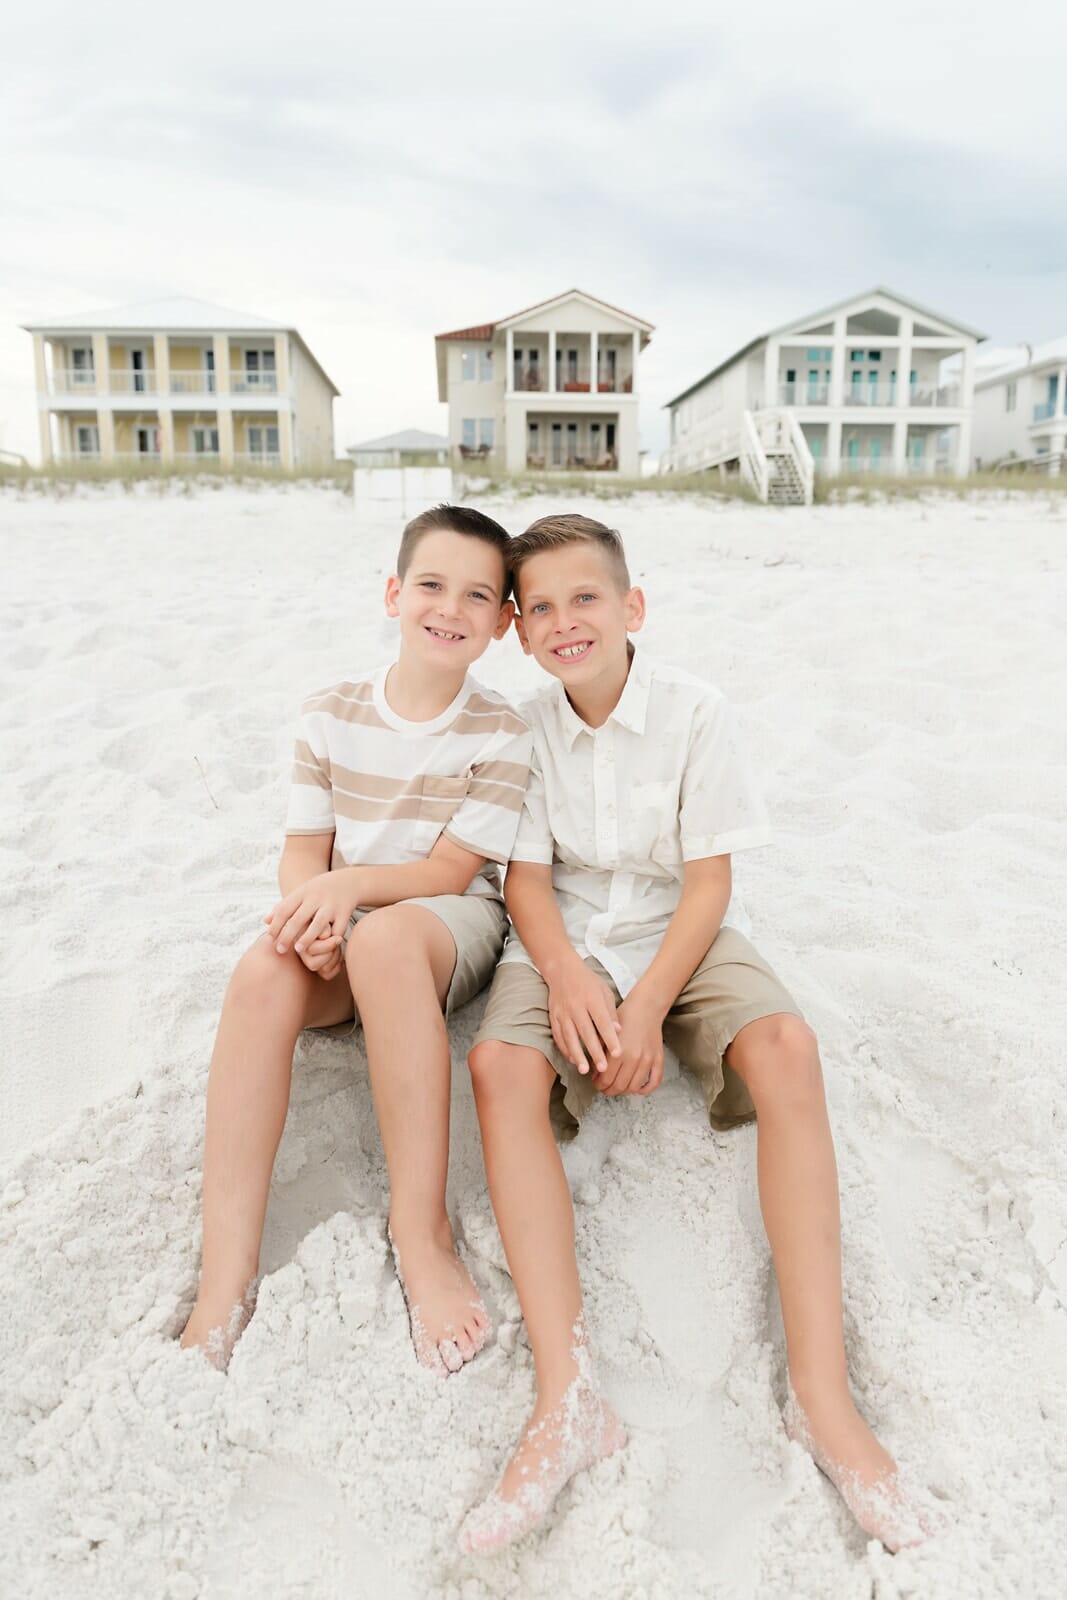 Two boys sitting on the beach in front of houses Destin Holiday Isle.